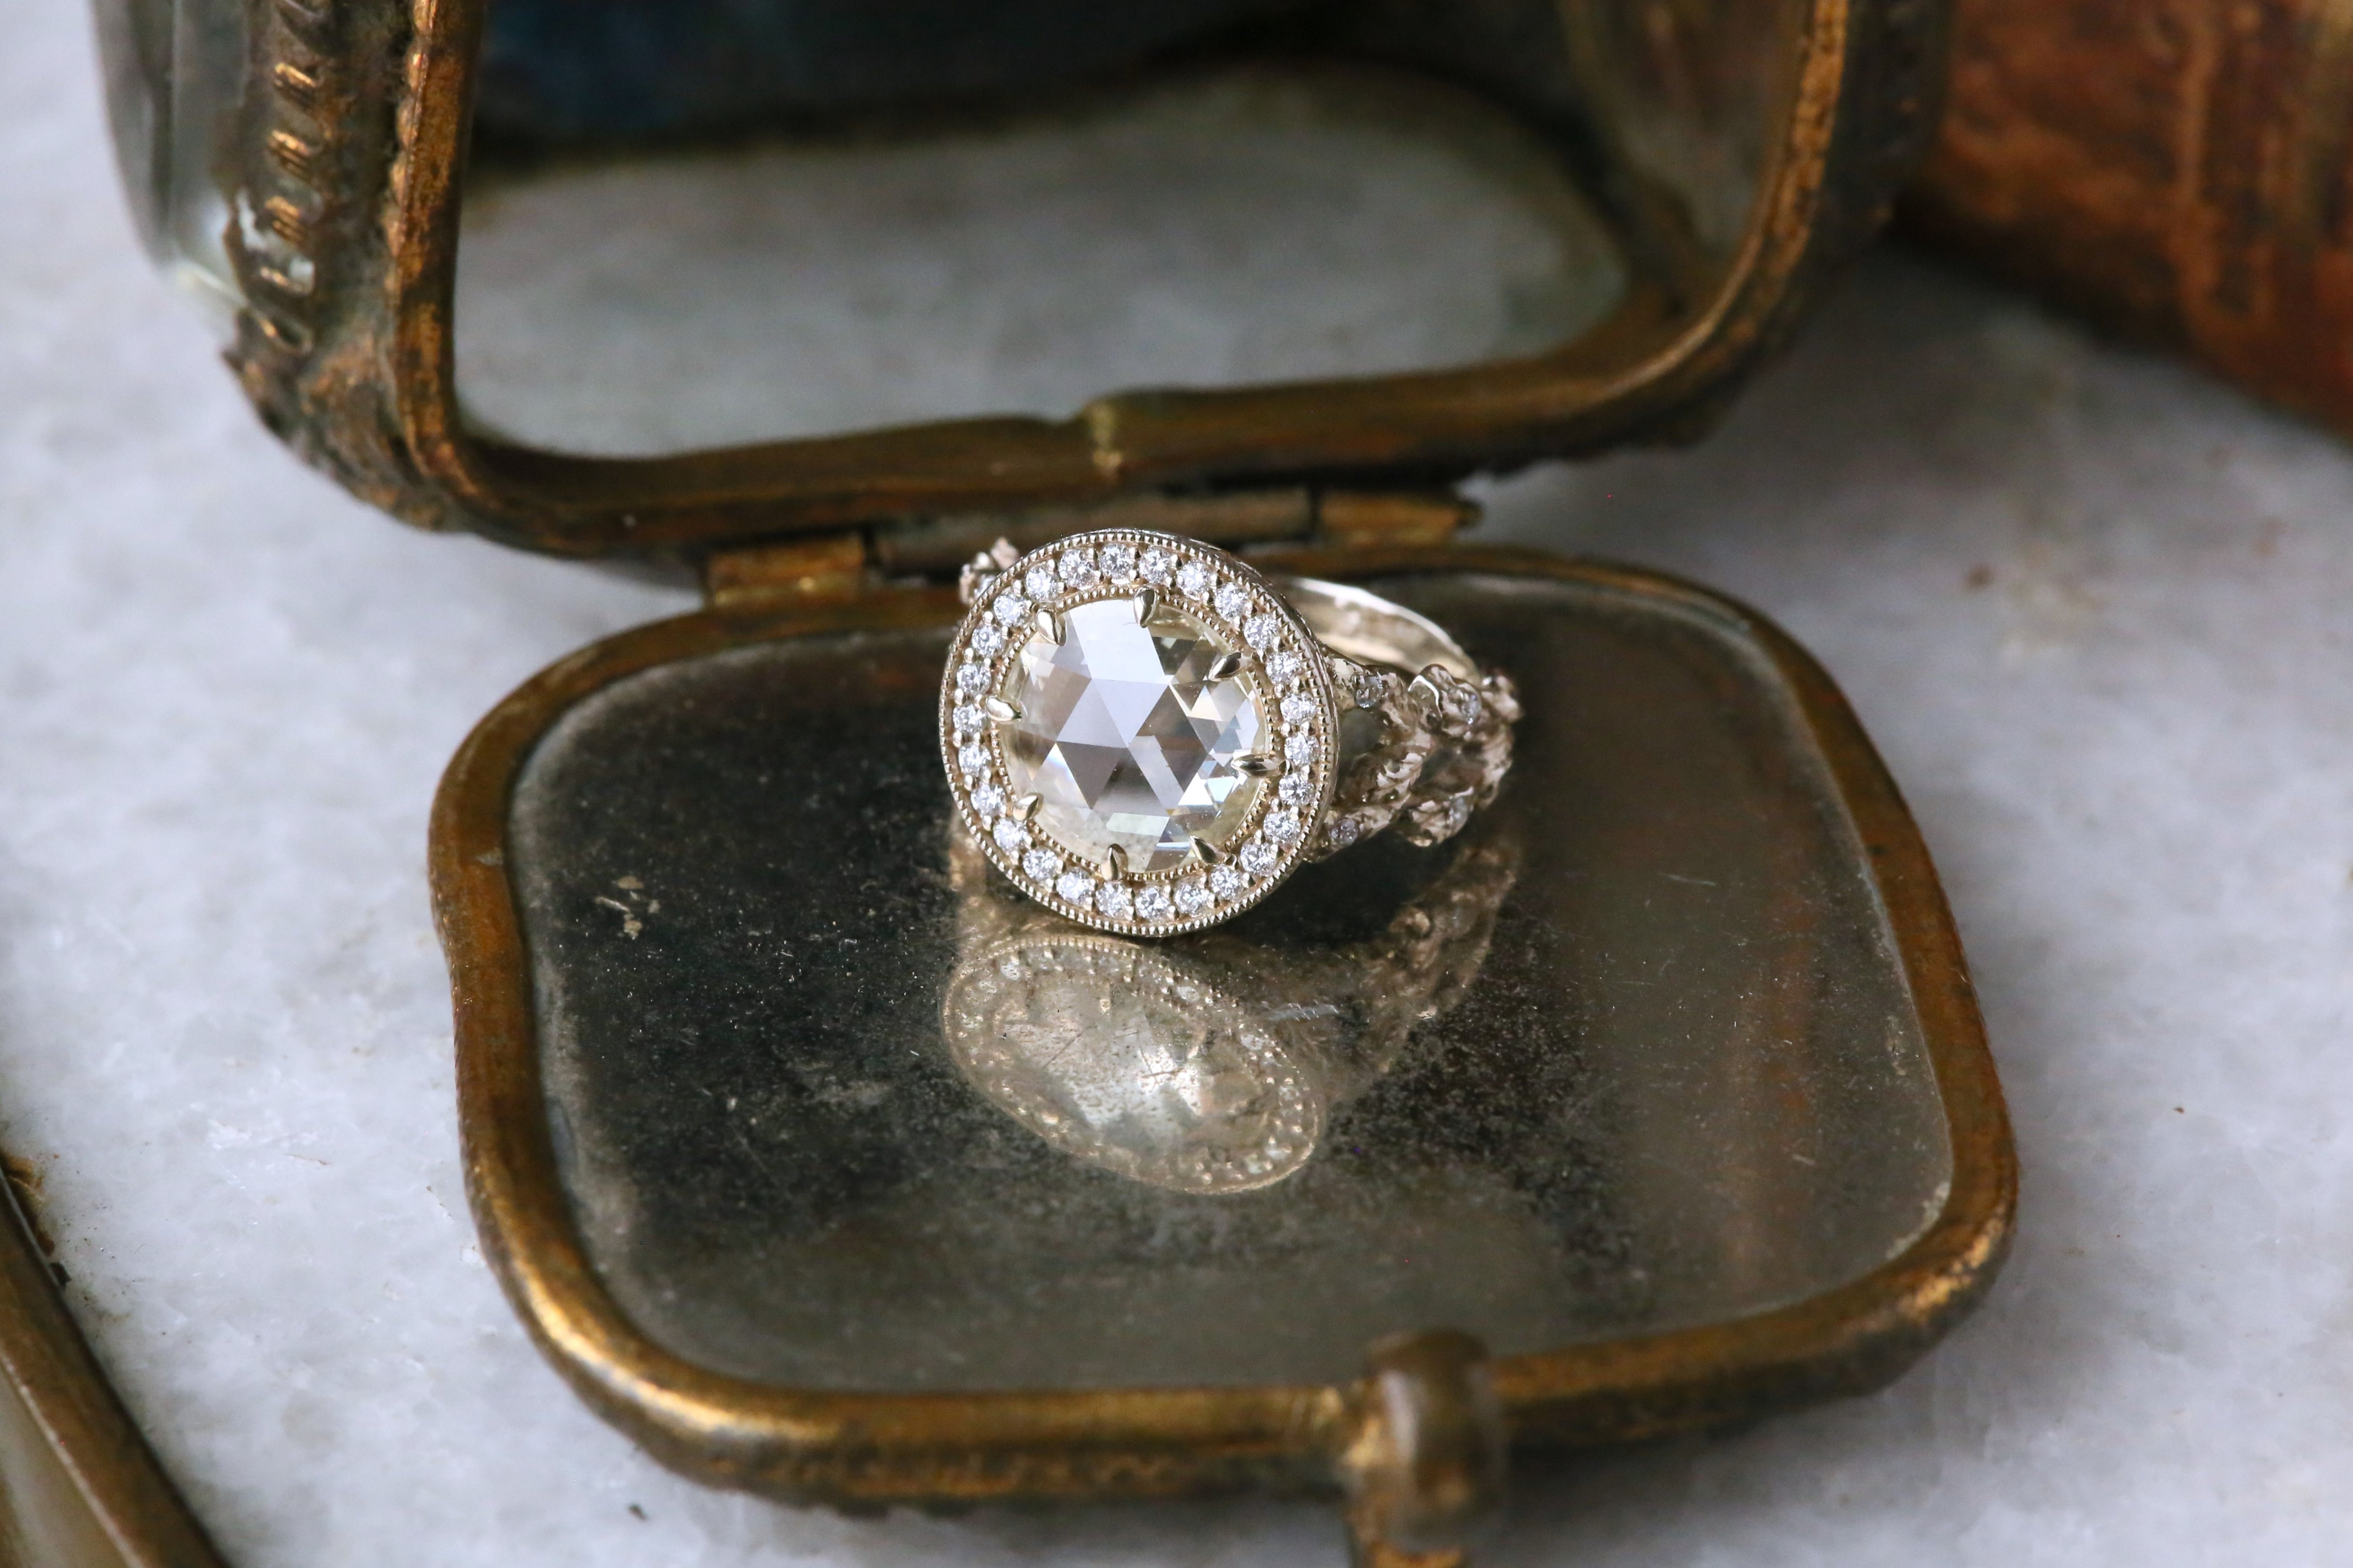 ON A PHOTOSHOOT The Galatea Ring in Natural Antique Diamond